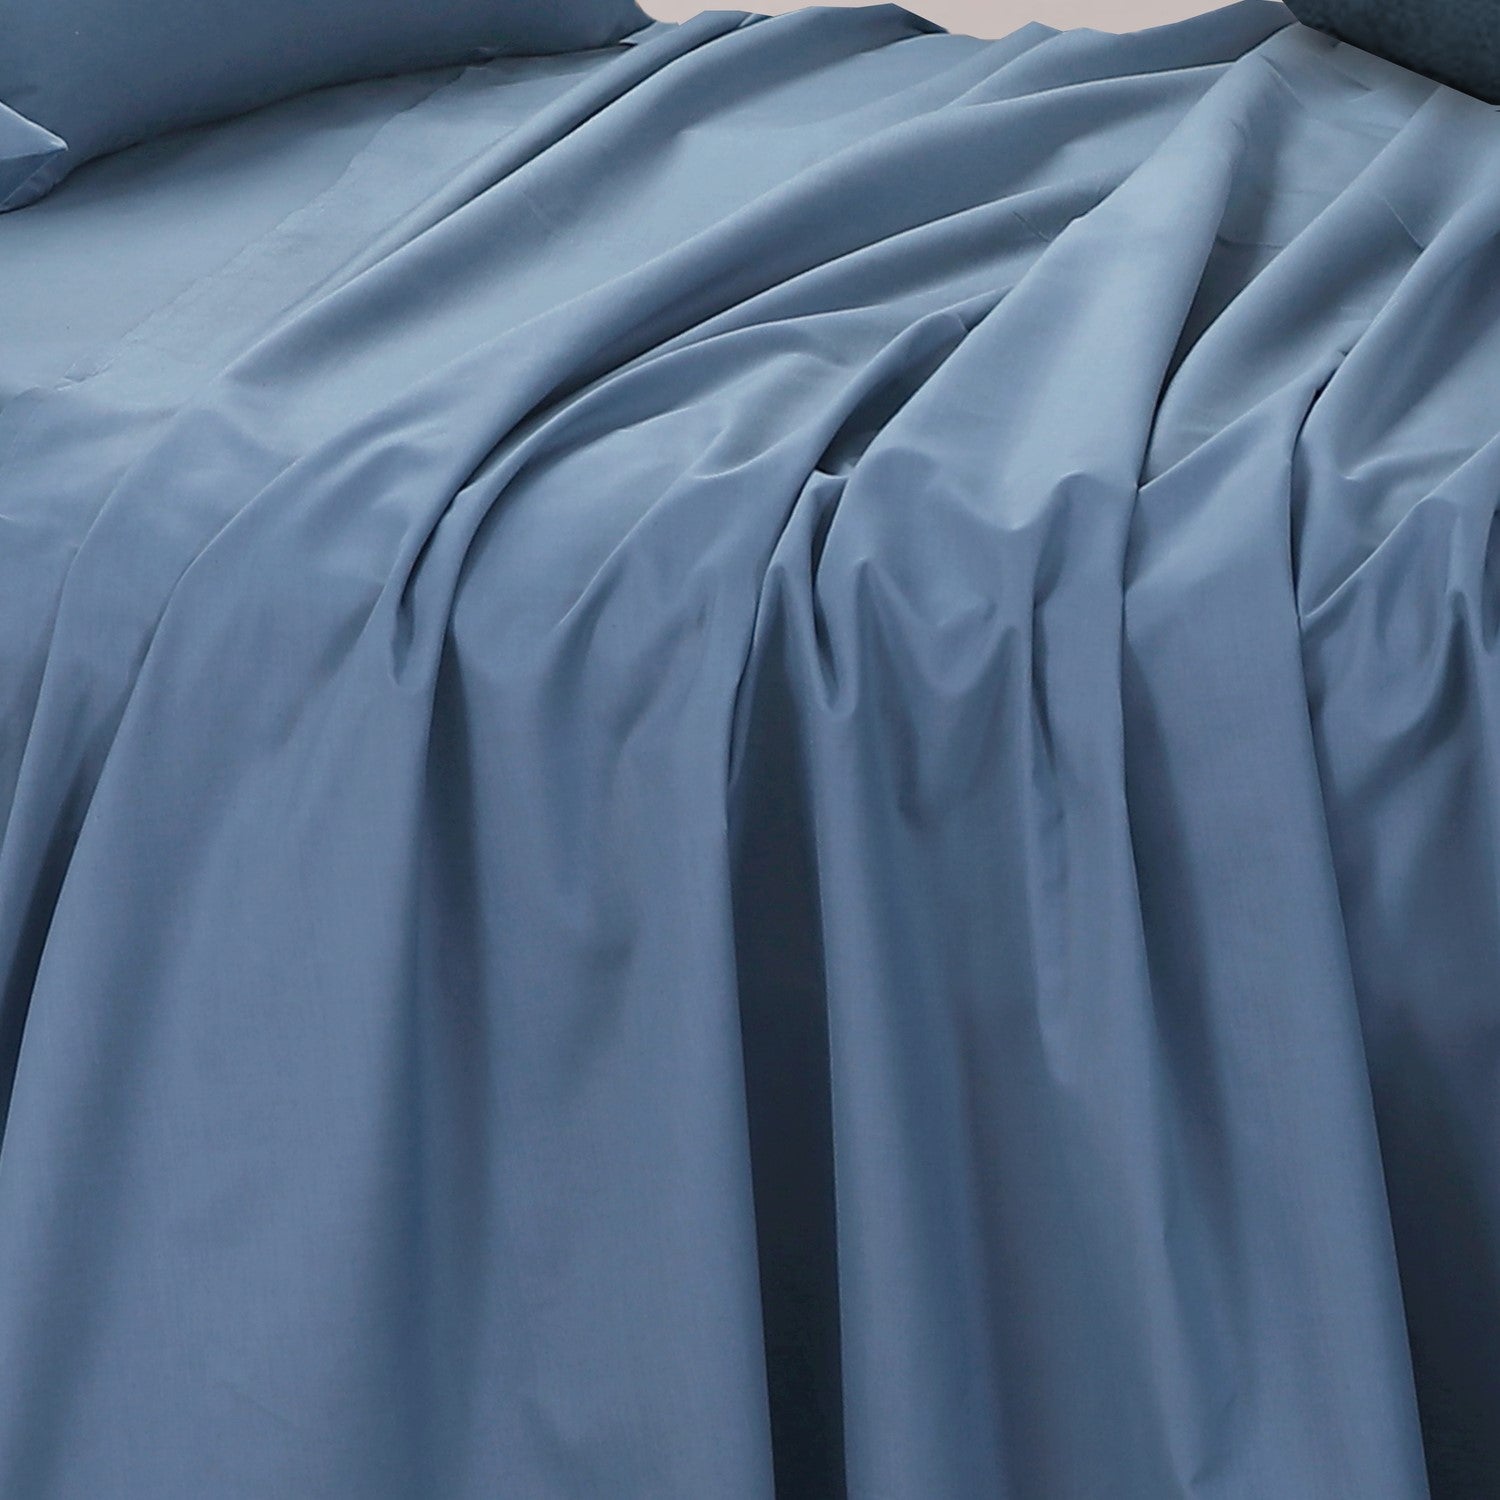 Sheet Set | Marine Bed Sheet with Pillow Covers